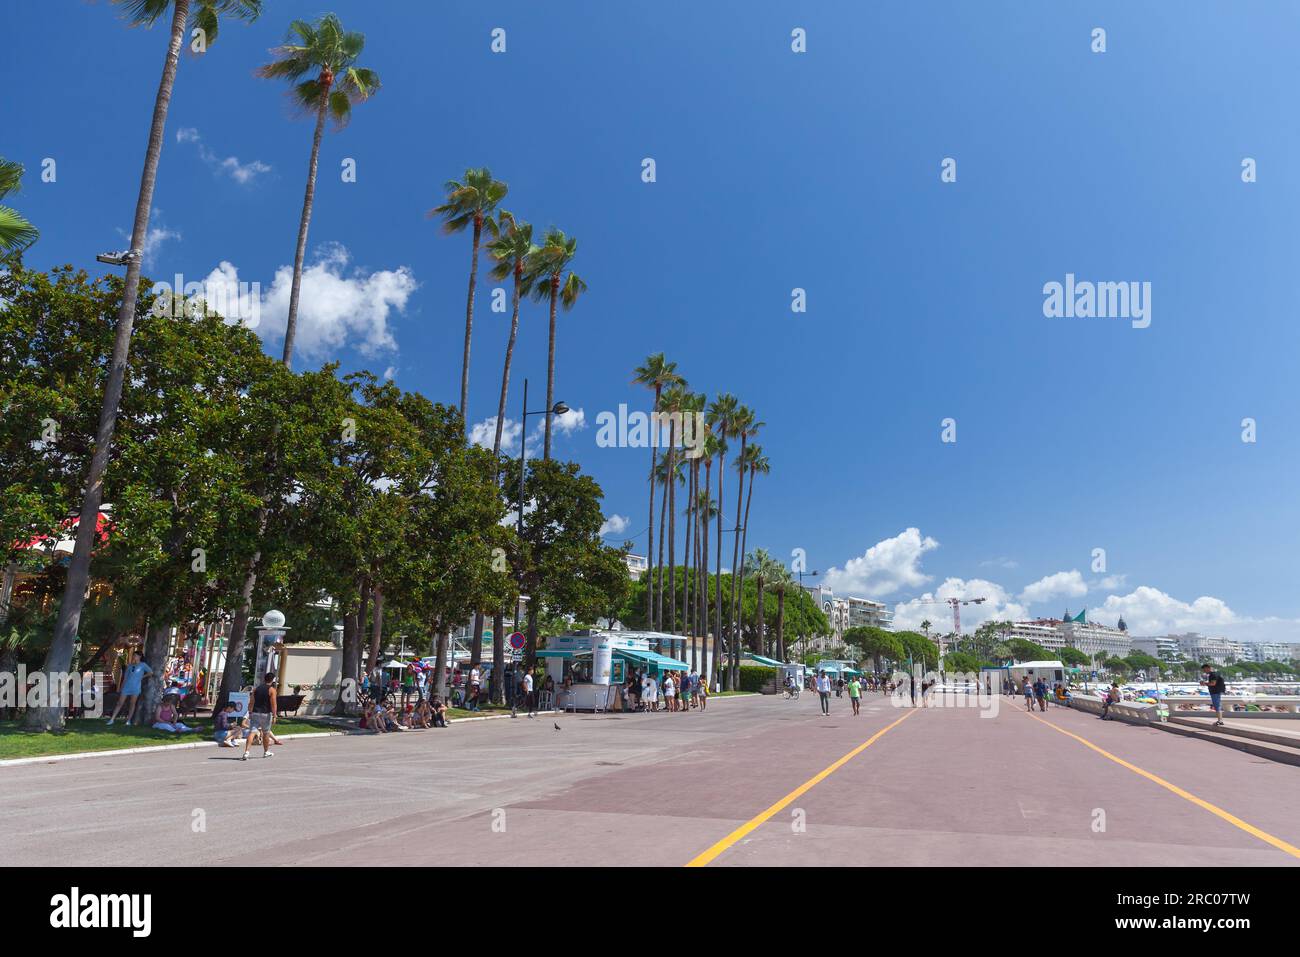 Cannes, France - August 14, 2018: Boulevard de la Croisette, street view with walking people. Cannes on a sunny summer day Stock Photo